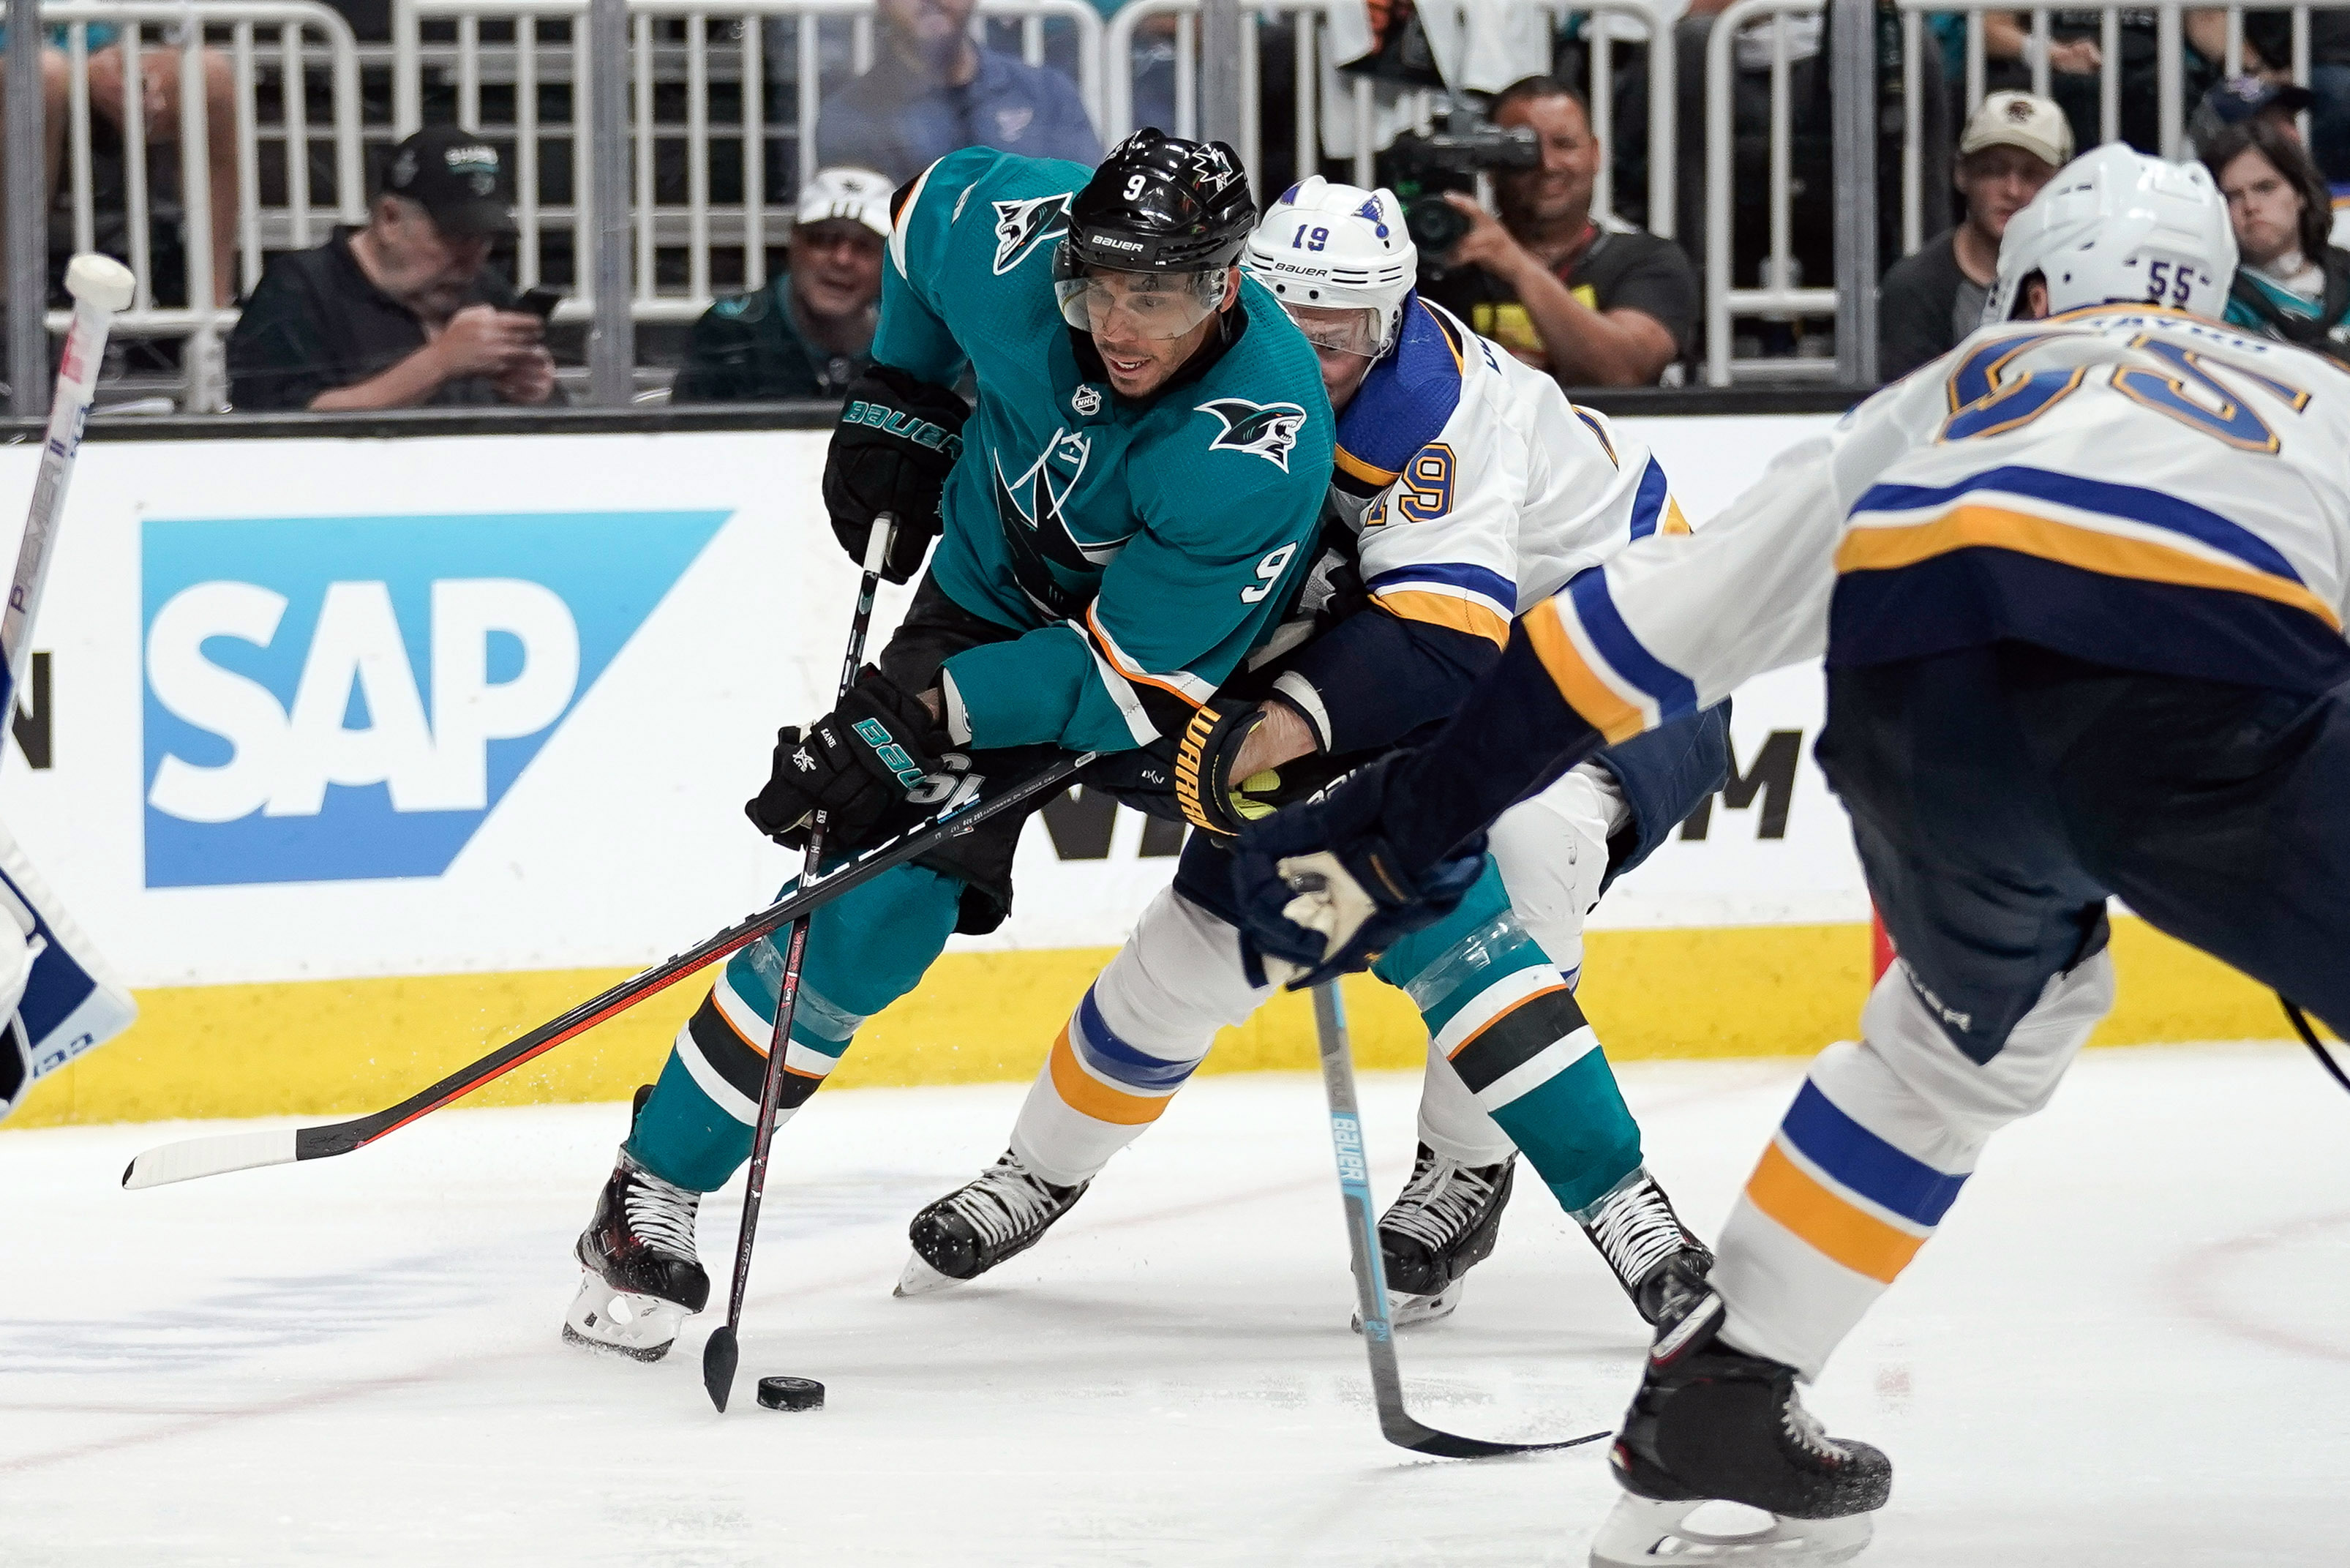 May 11, 2019; San Jose Sharks left wing Evander Kane controls the puck against St. Louis Blues defenseman Jay Bouwmeester and defenseman Colton Parayko during the third period in game one of the Western Conference Final of the 2019 Stanley Cup Playoffs at